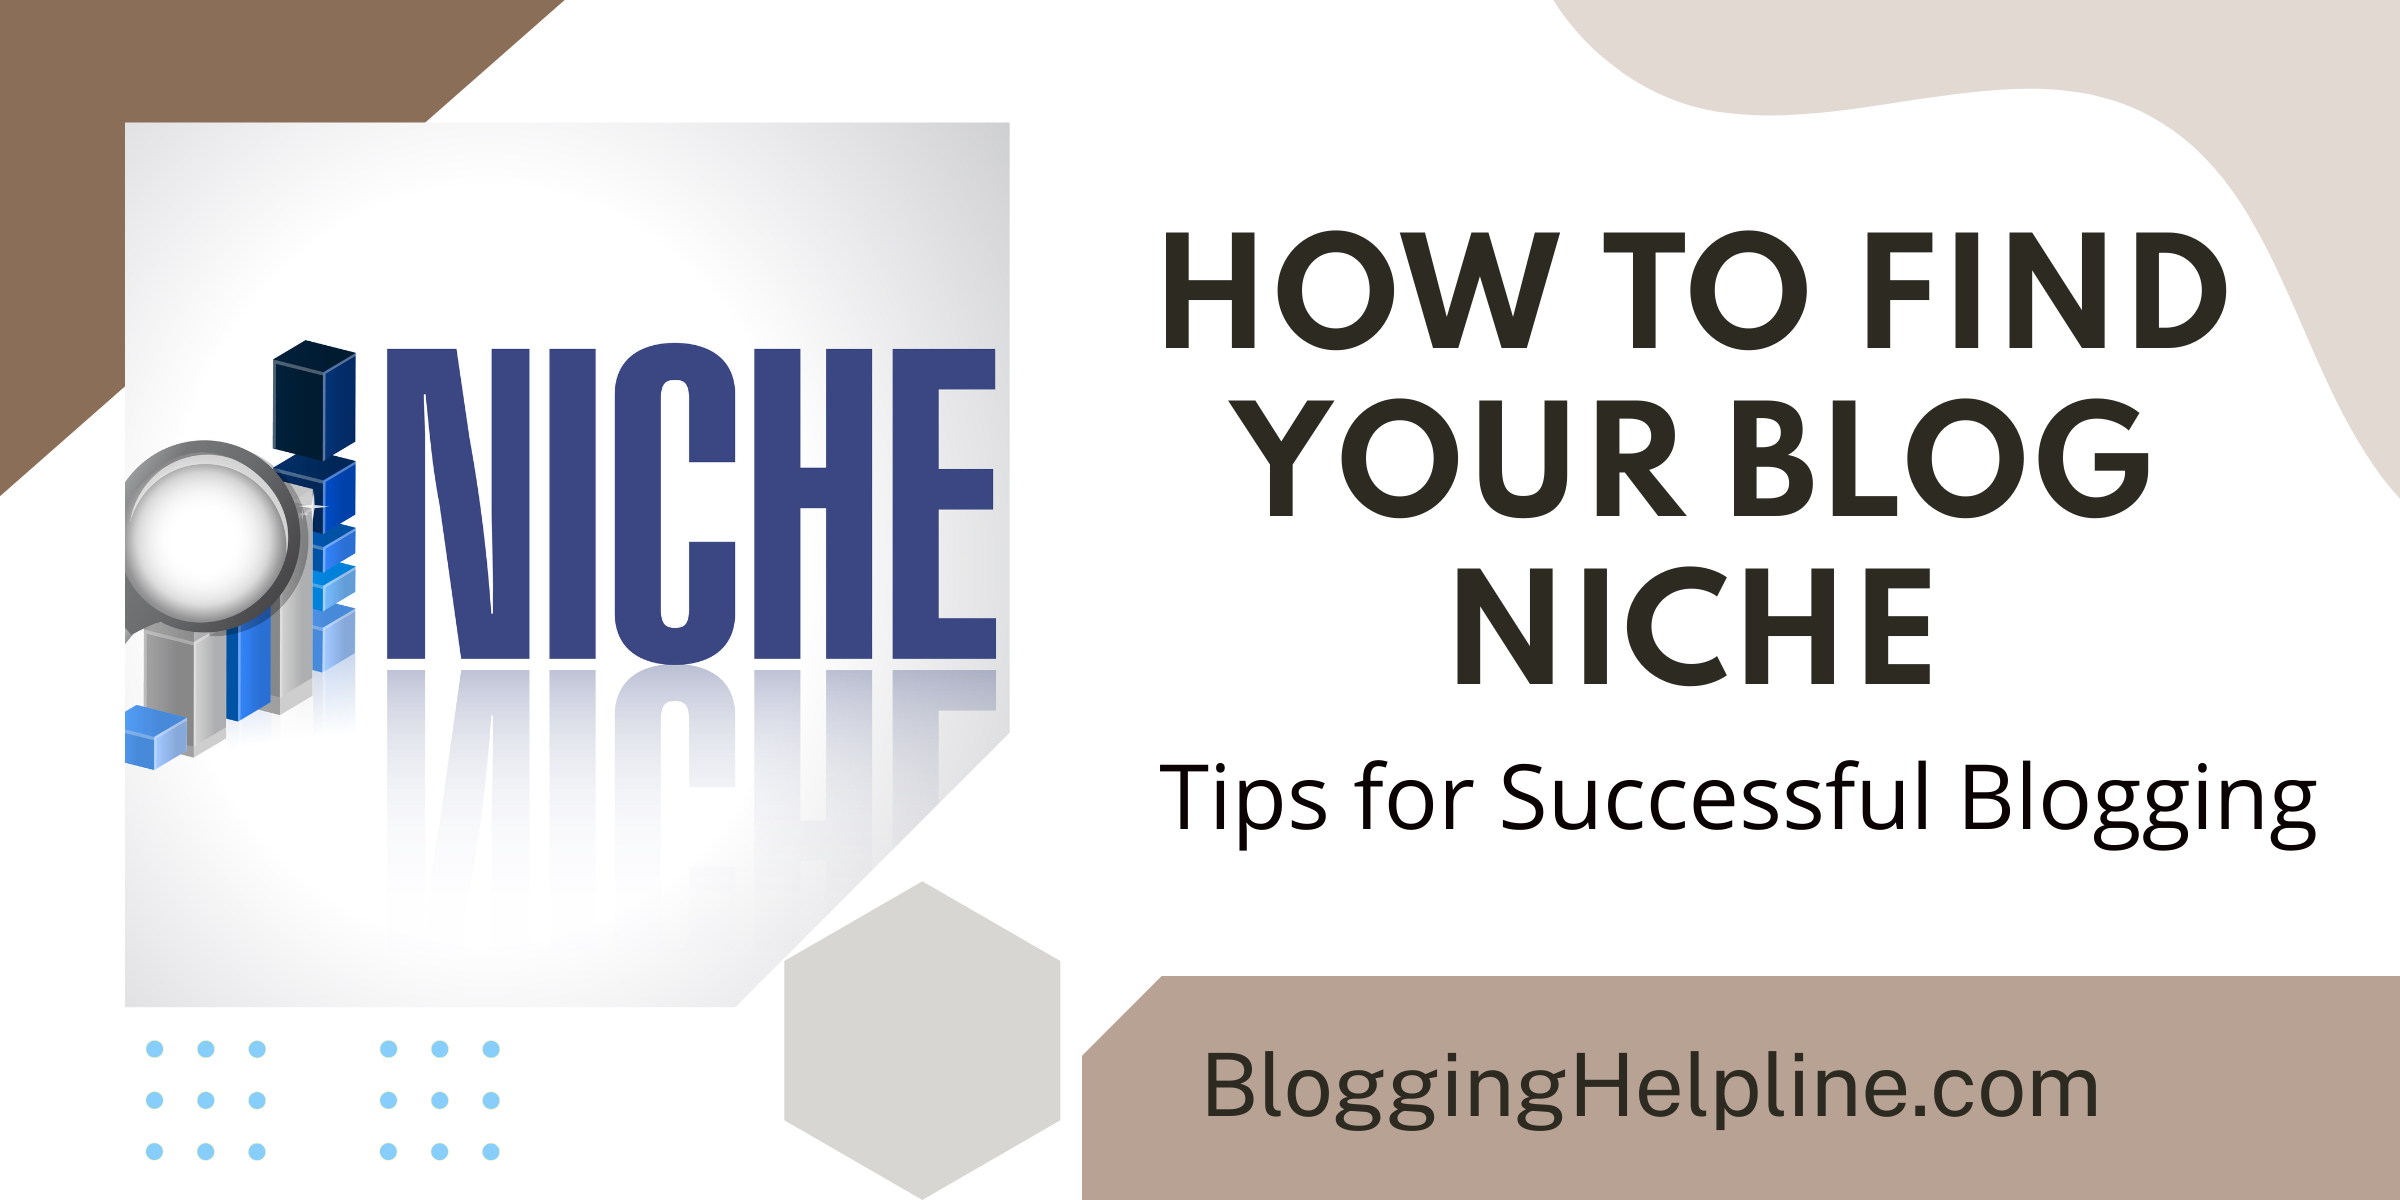 How to Find Your Blog Niche: Tips for Successful Blogging